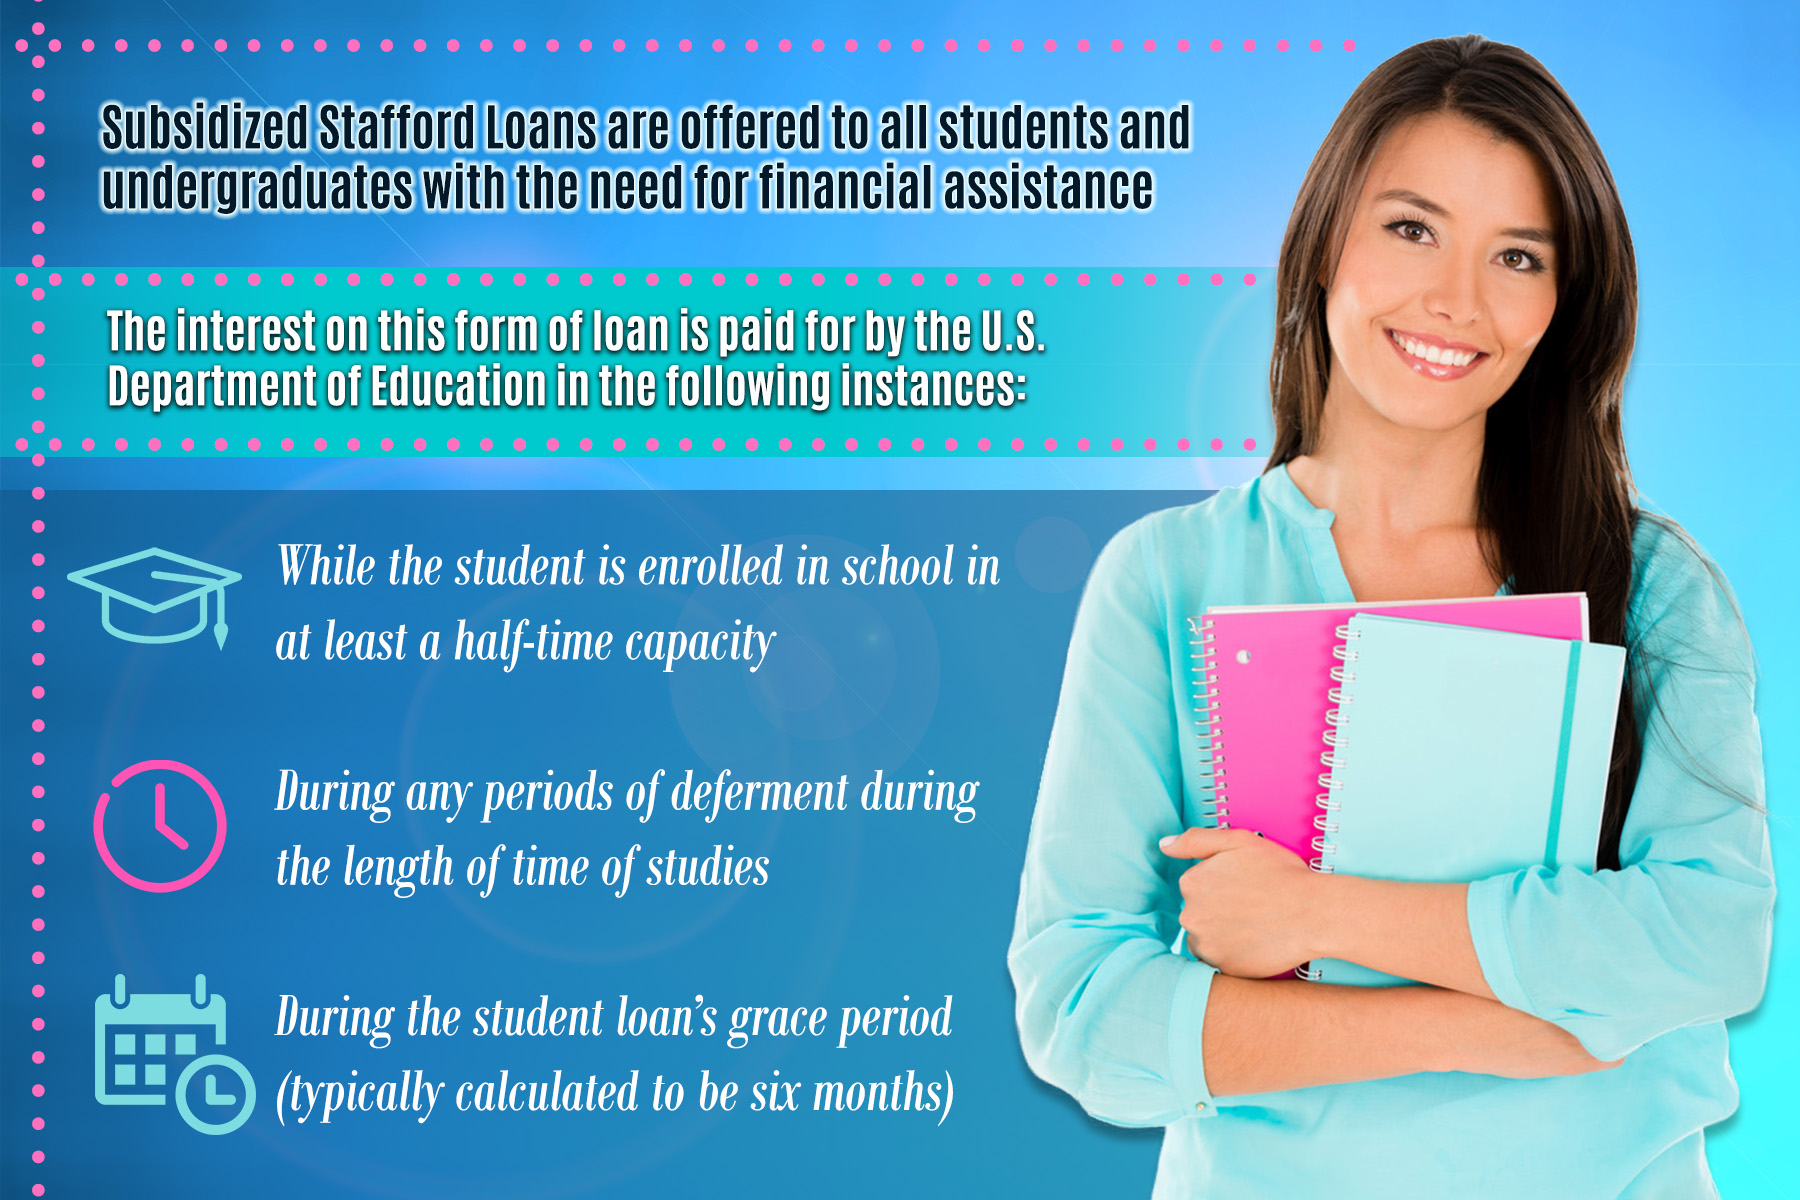 Student Loan Options Without A Co-Signer - US Student Loan Center